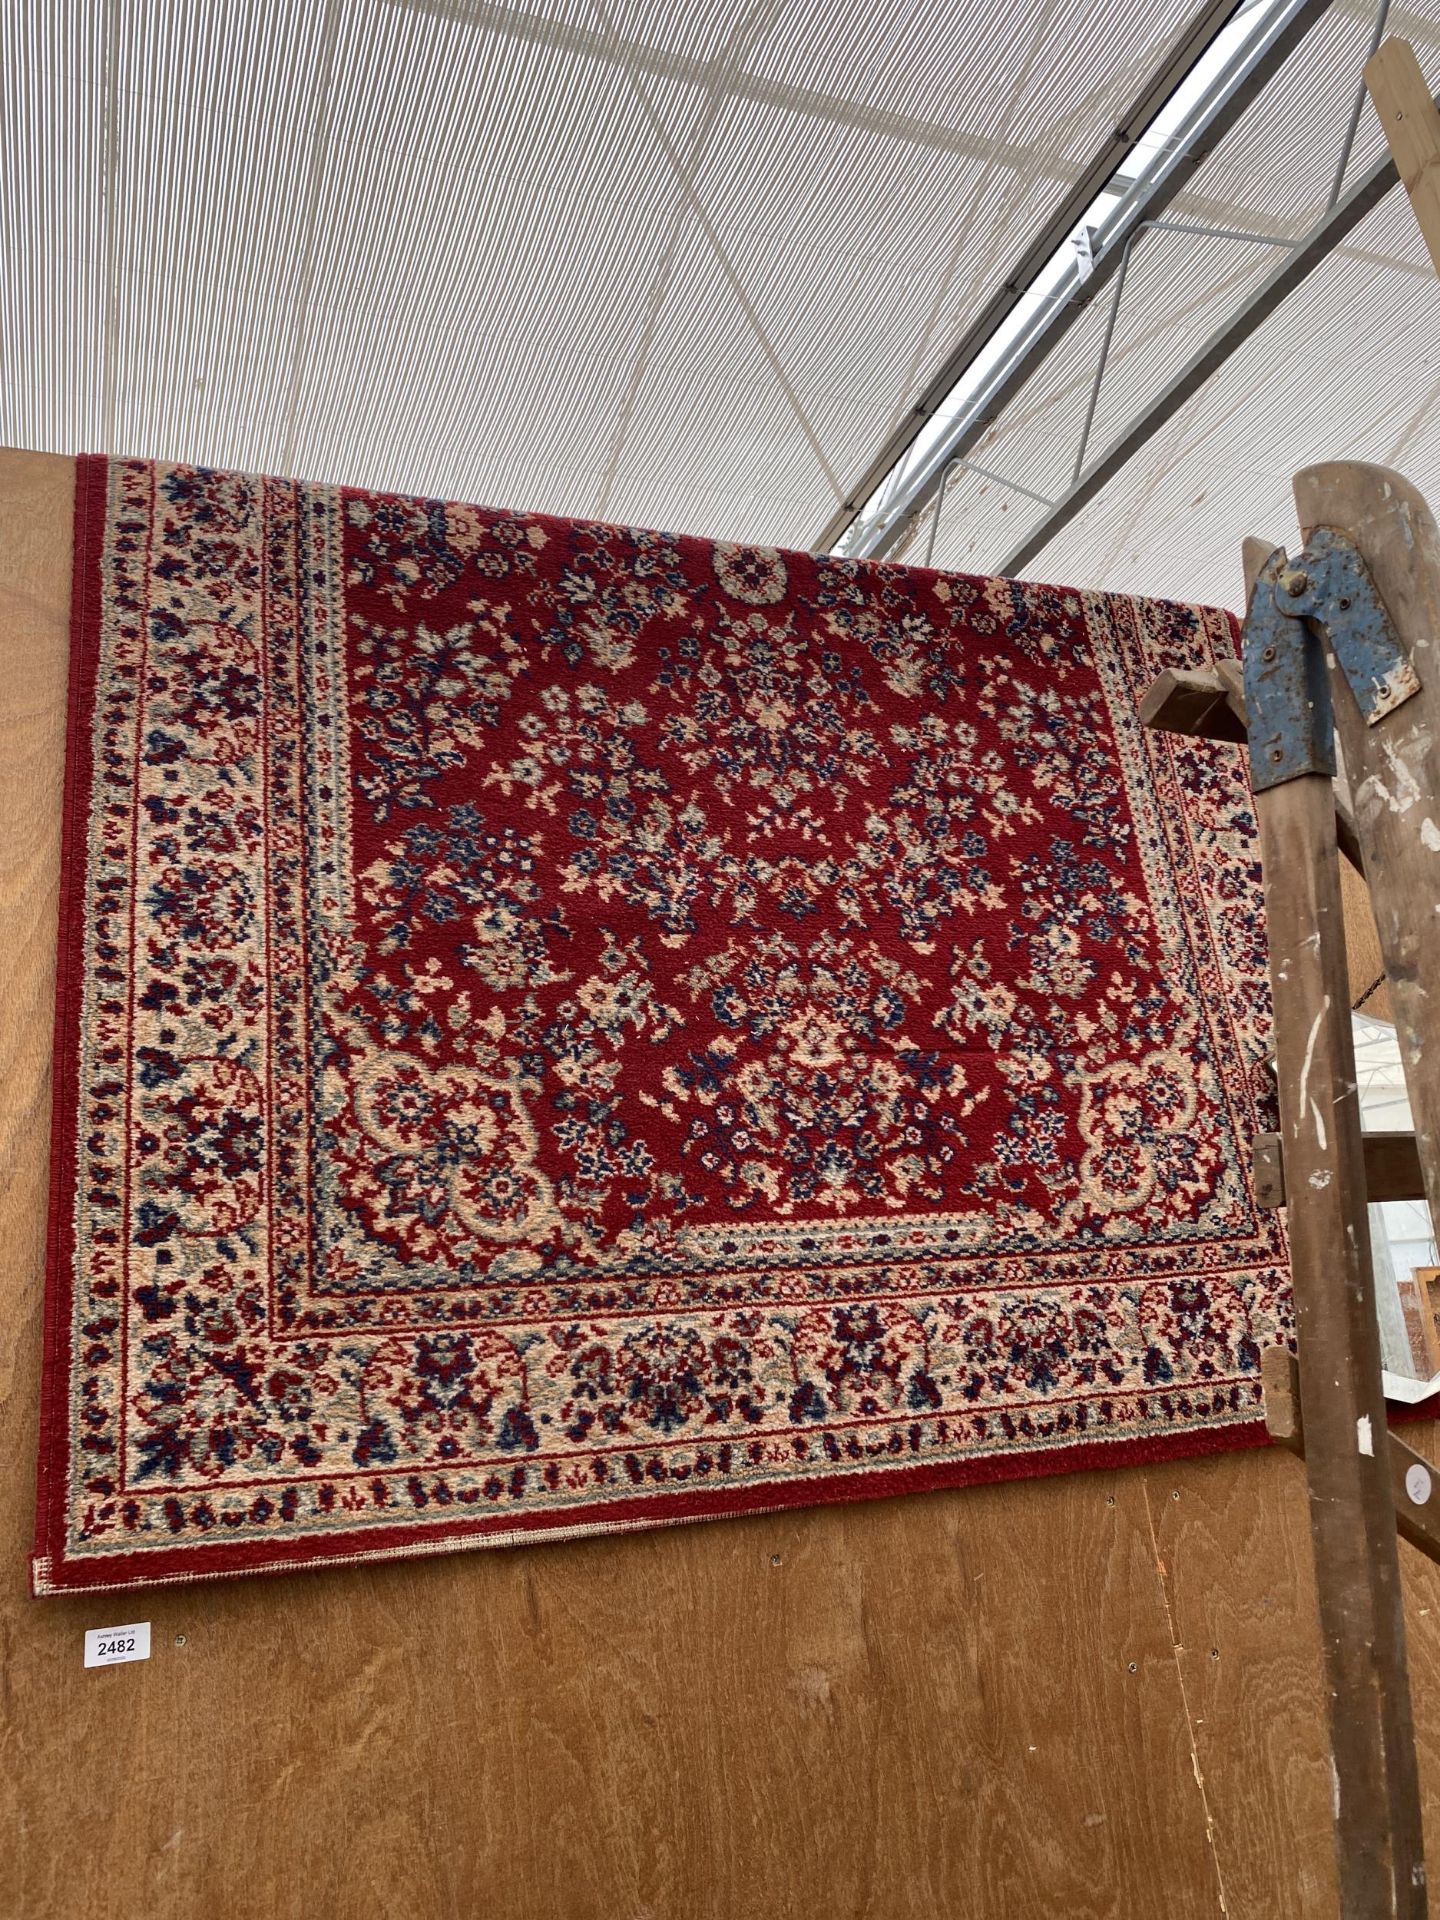 A RED PATTERNED RUG